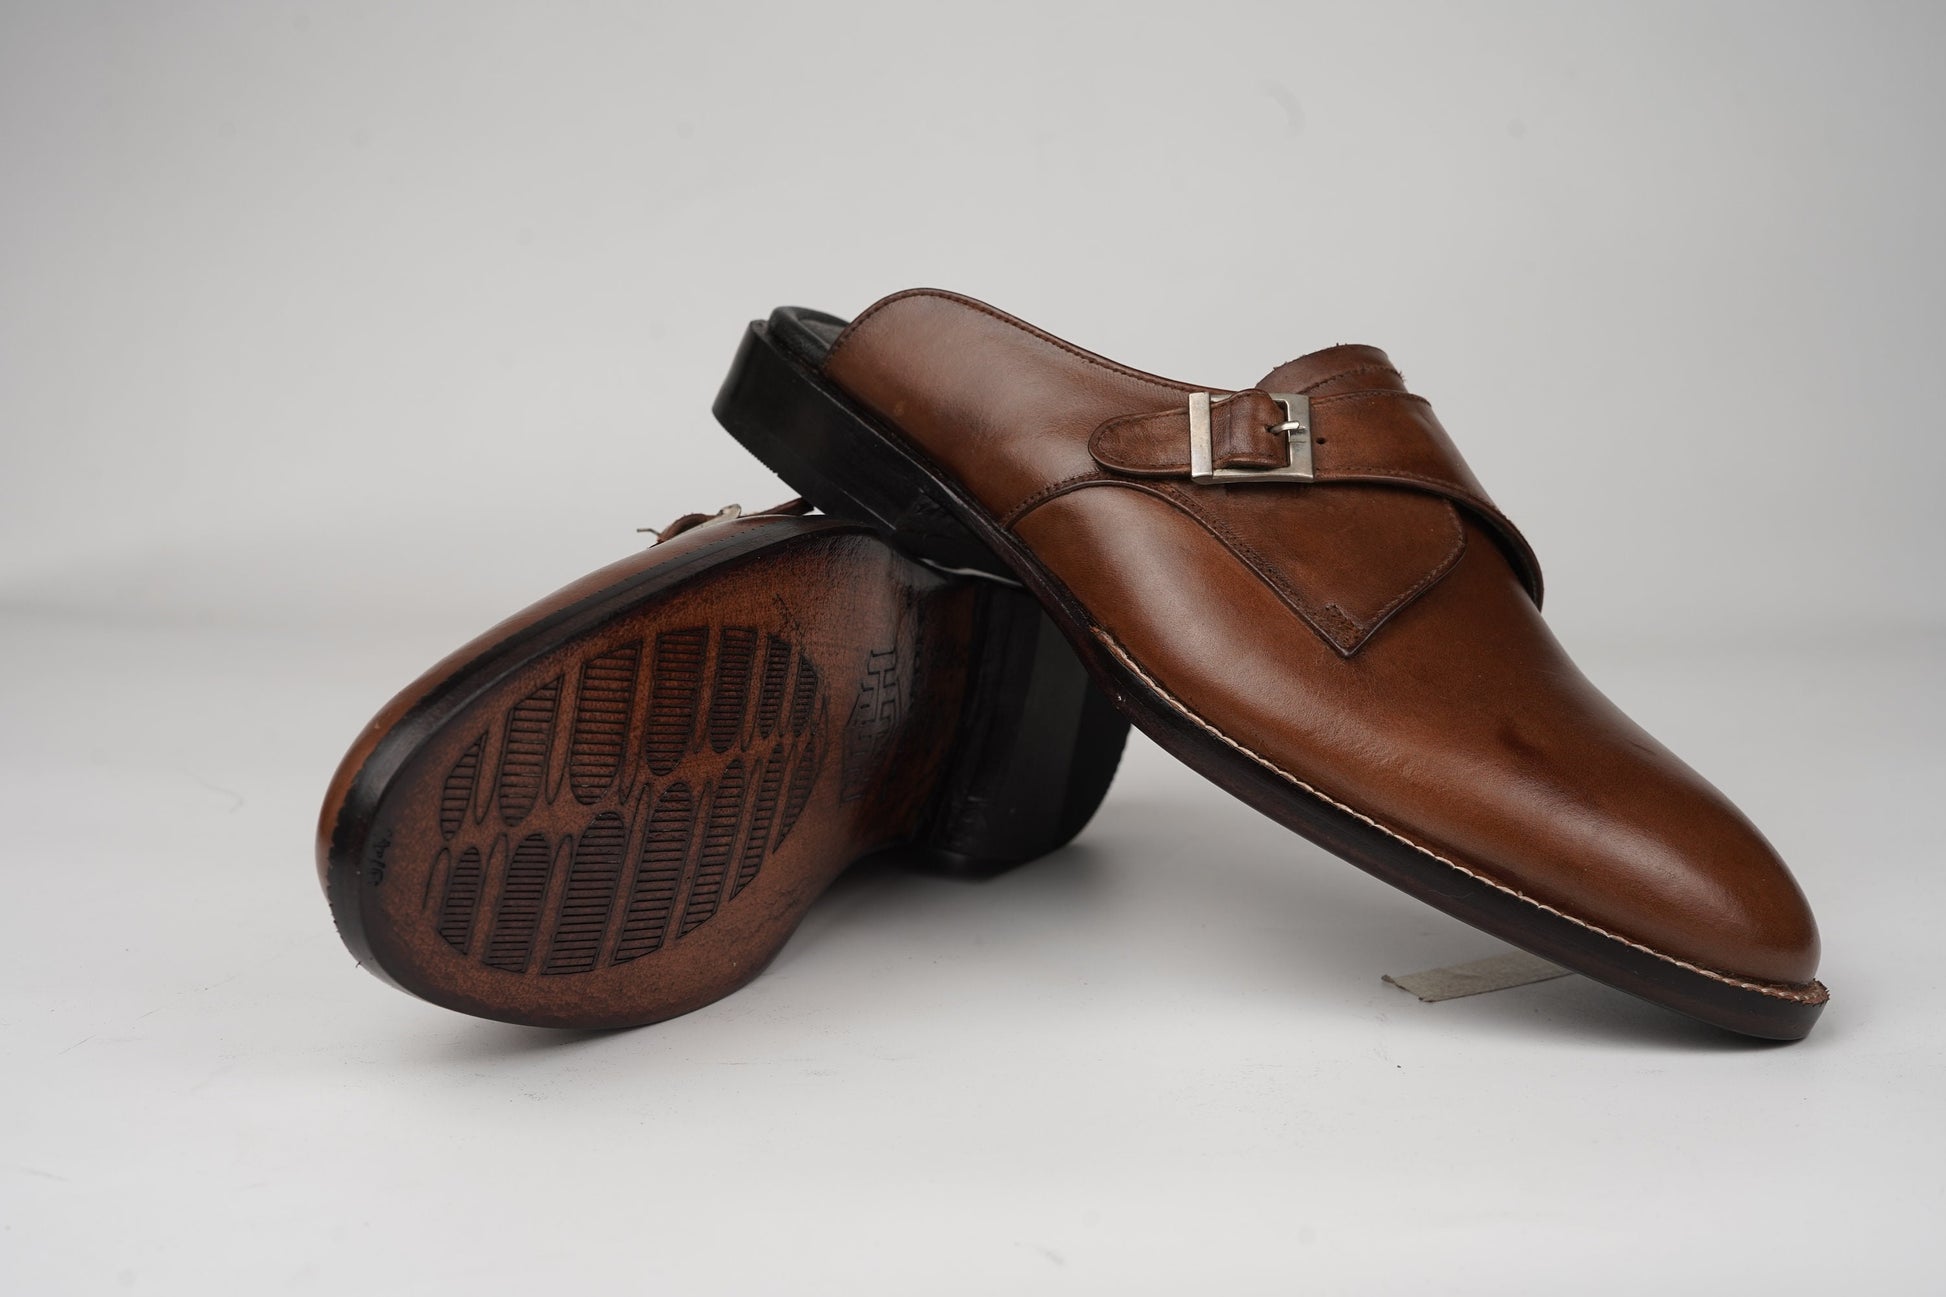 Brown backless Single Buckle loafer Slip On Mule Custom Made-To-Order Shoes Premium Quality Handmade using Full Grain Oily Pull up Leather Woozy Store